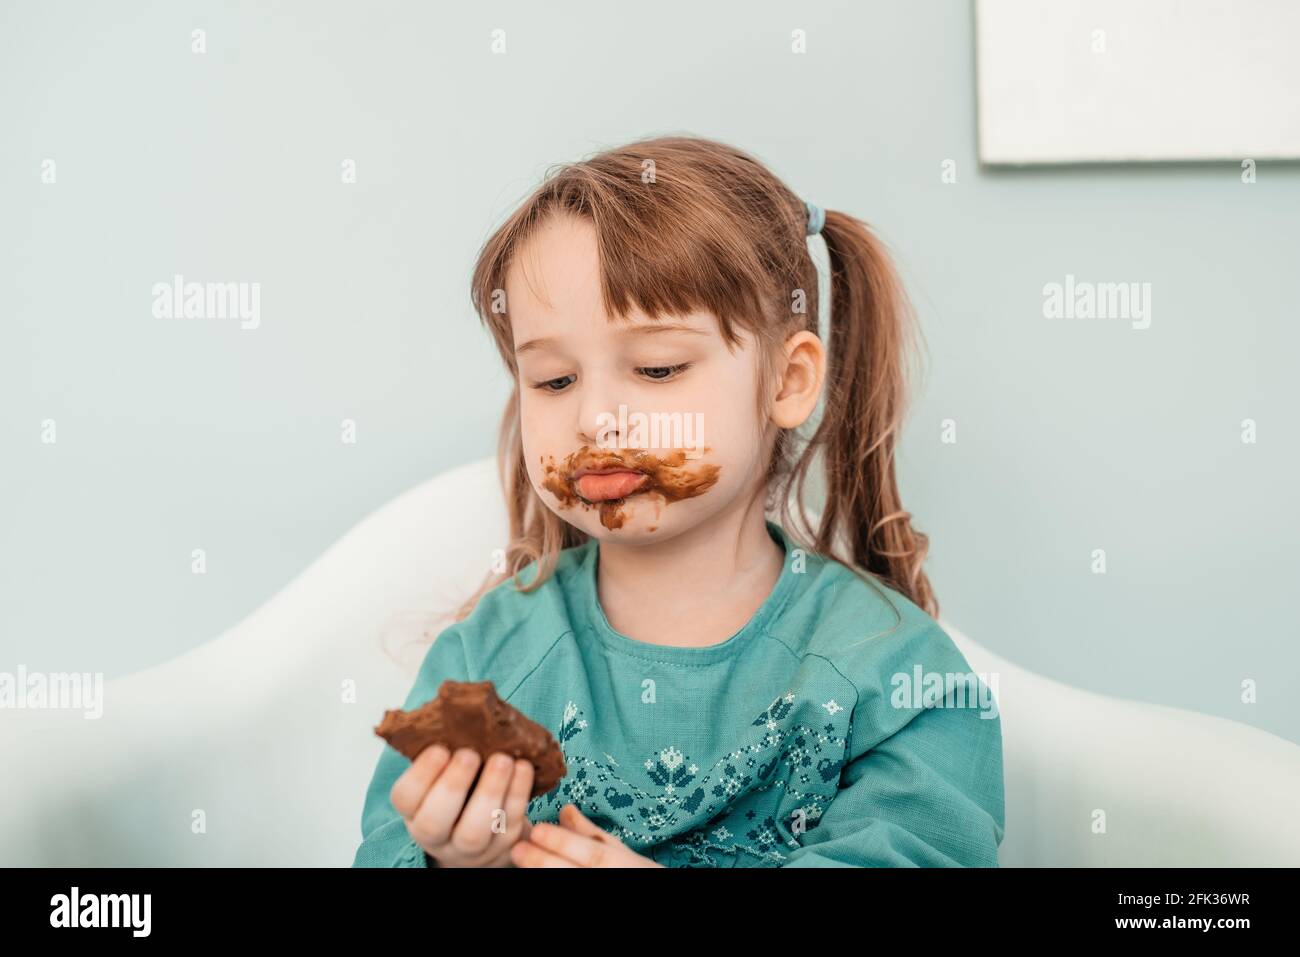 Adorable baby girl with face covered in chocolate. Stock Photo